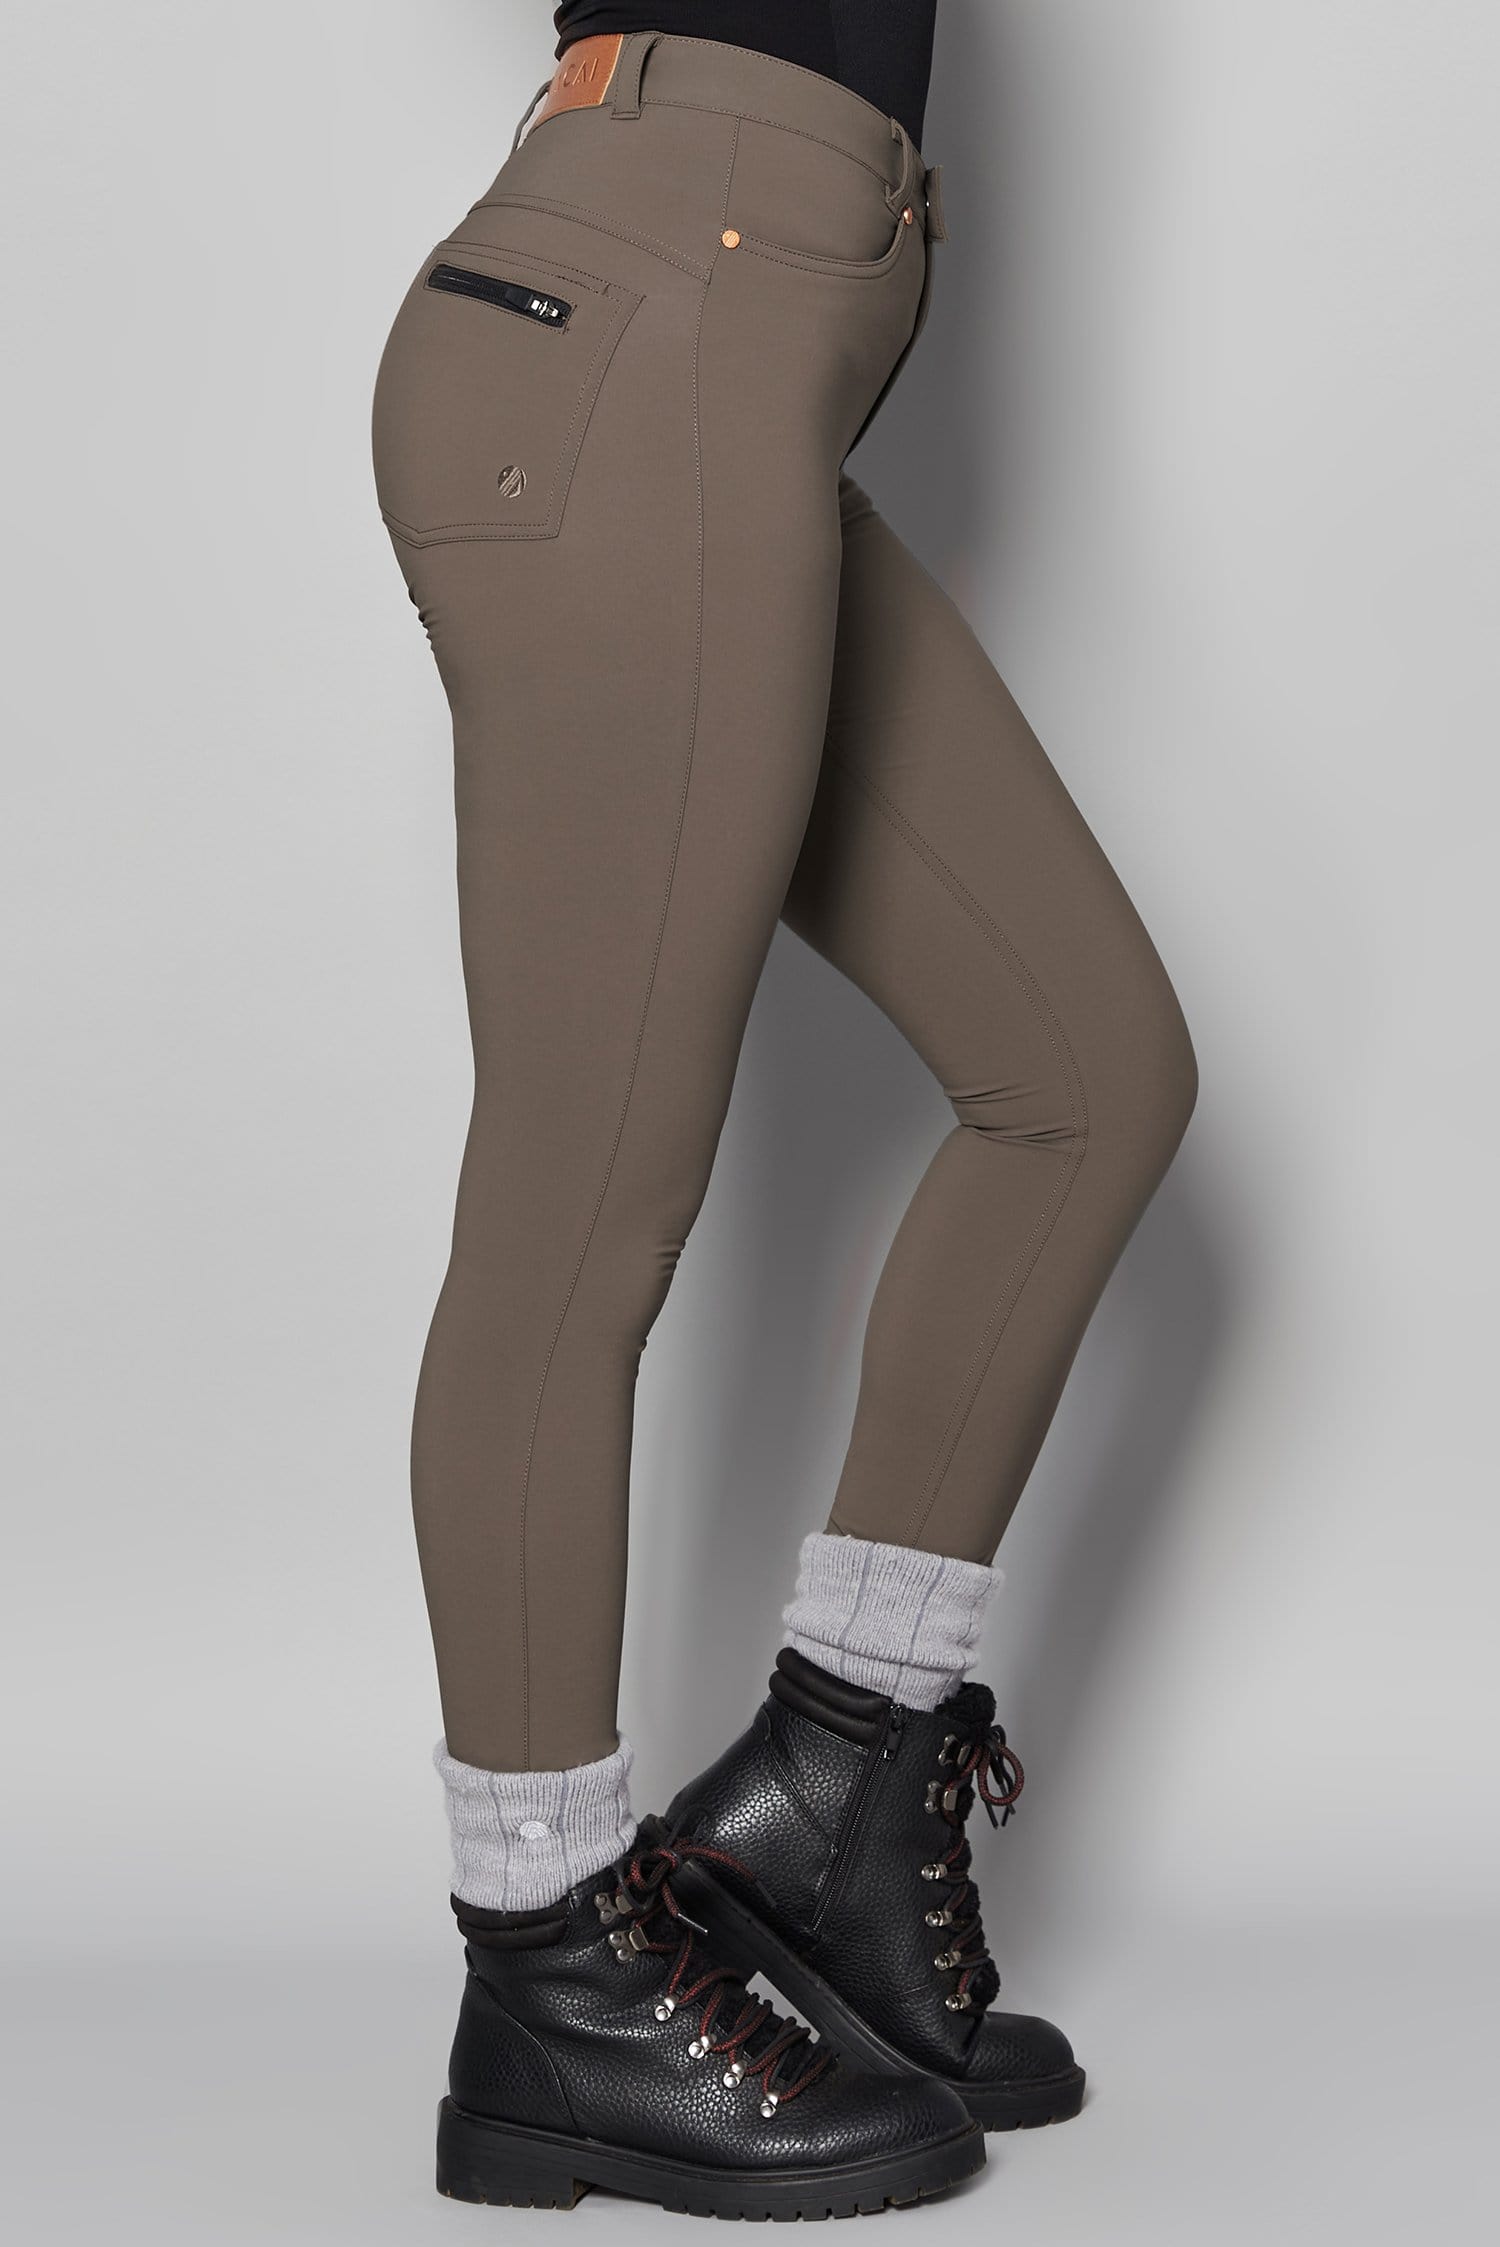 Max Stretch Skinny Outdoor Trousers - Sand - 32r / Uk14 - Womens - Acai Outdoorwear